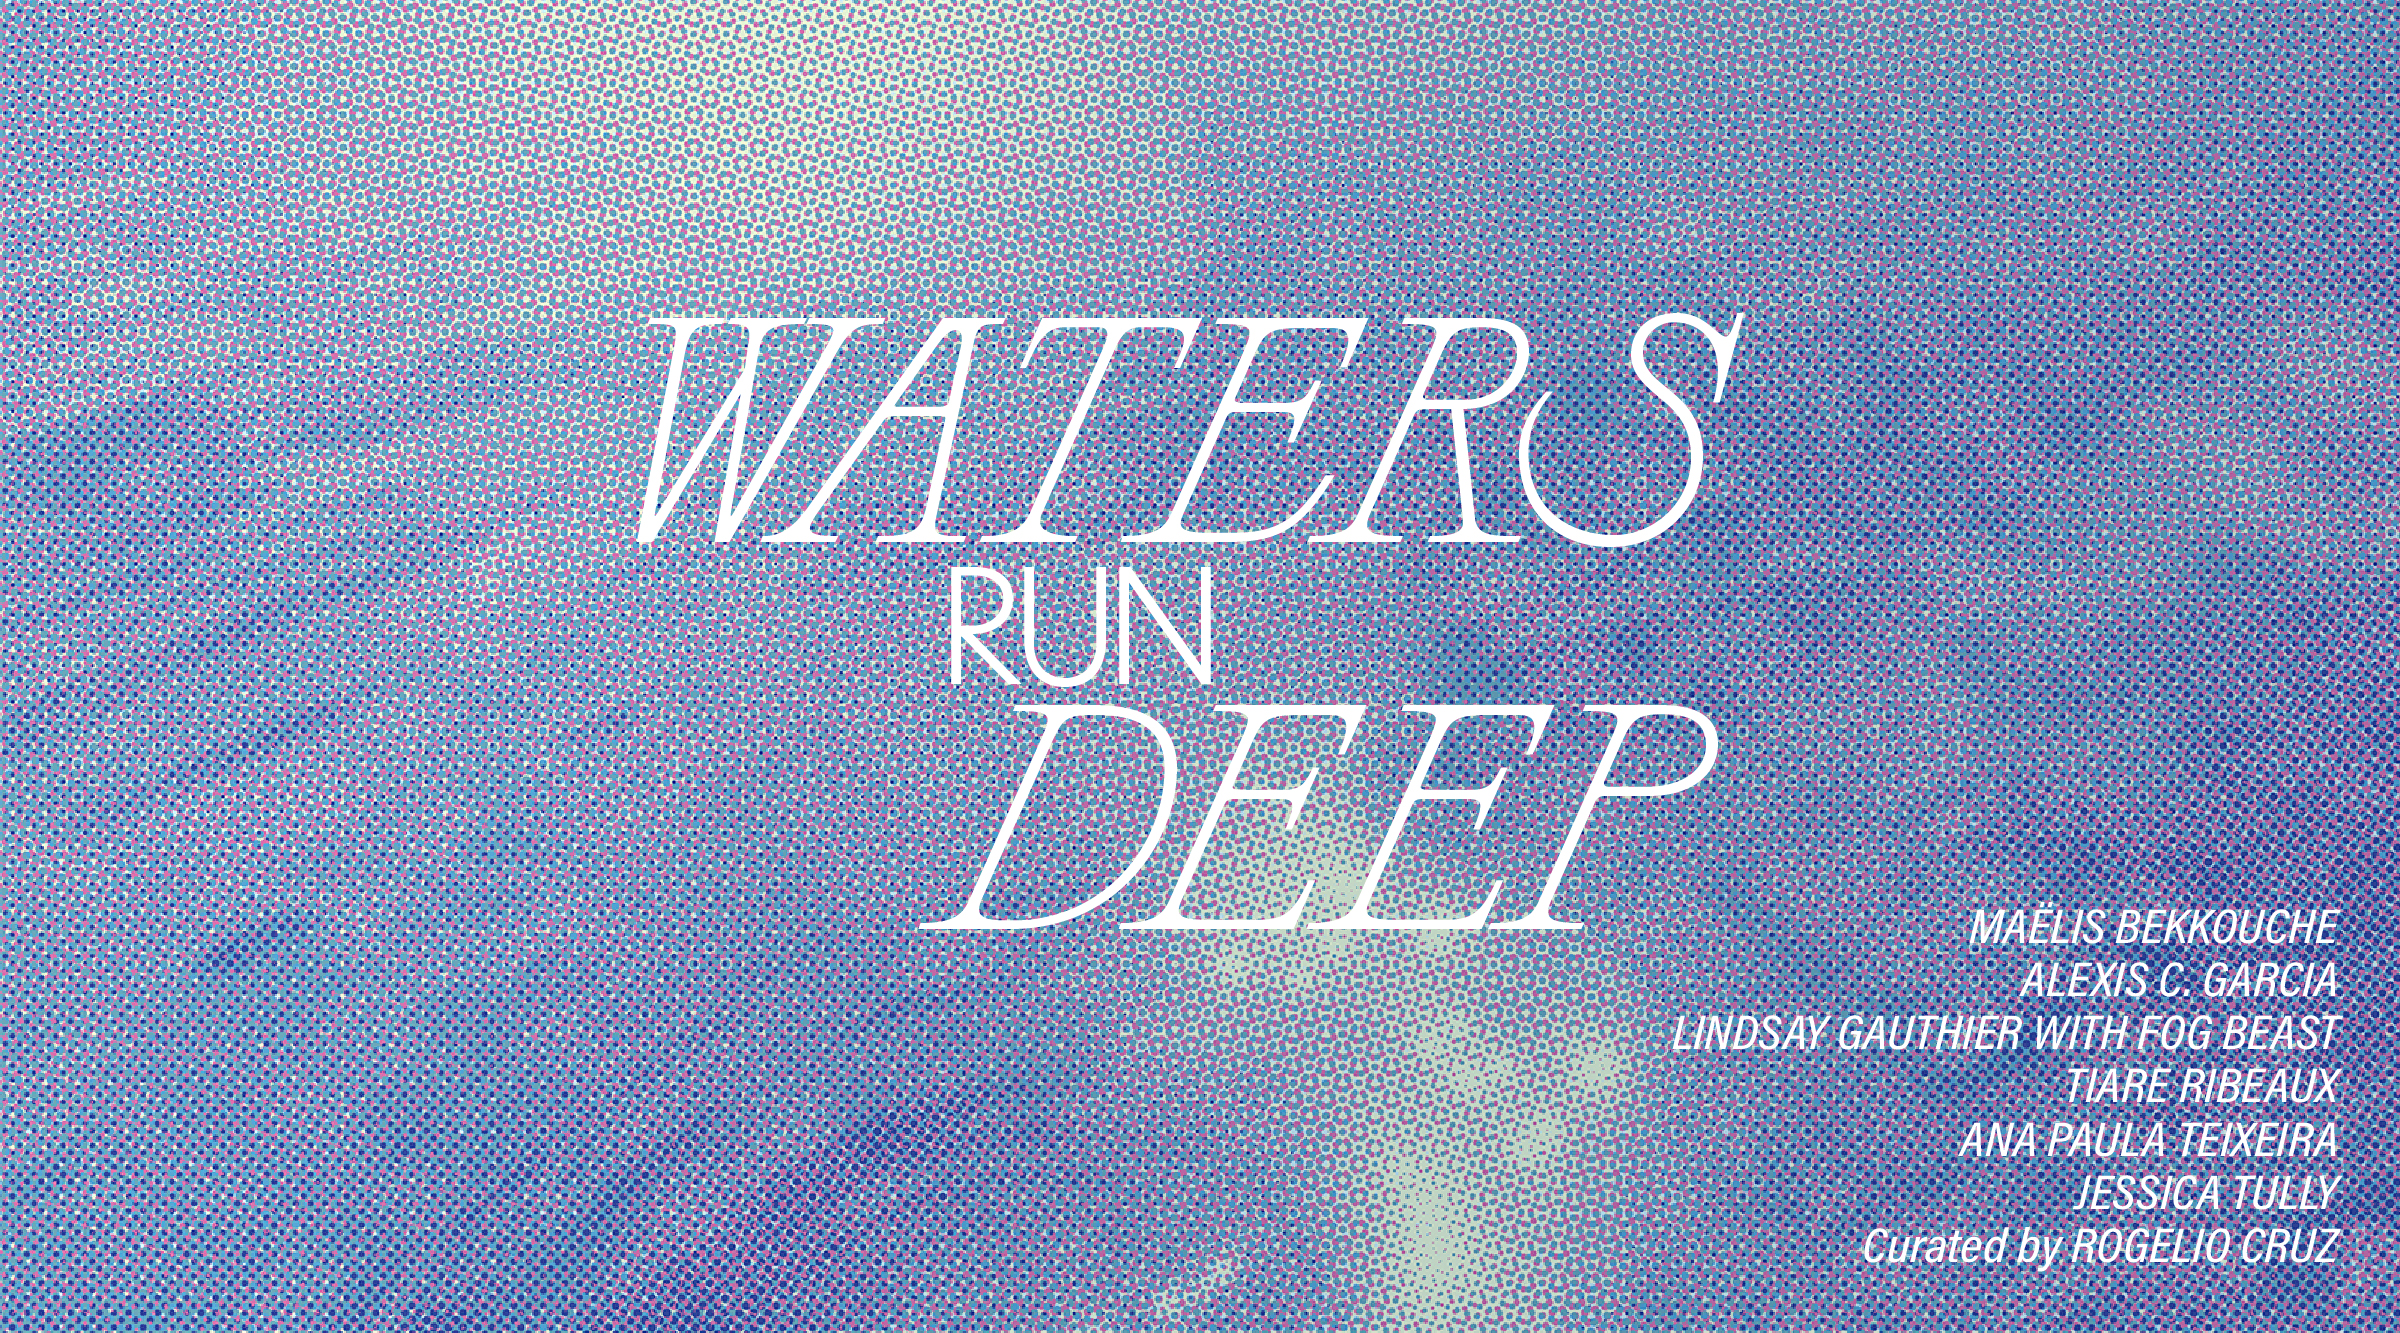 The words "Waters Run Deep" on a watery background